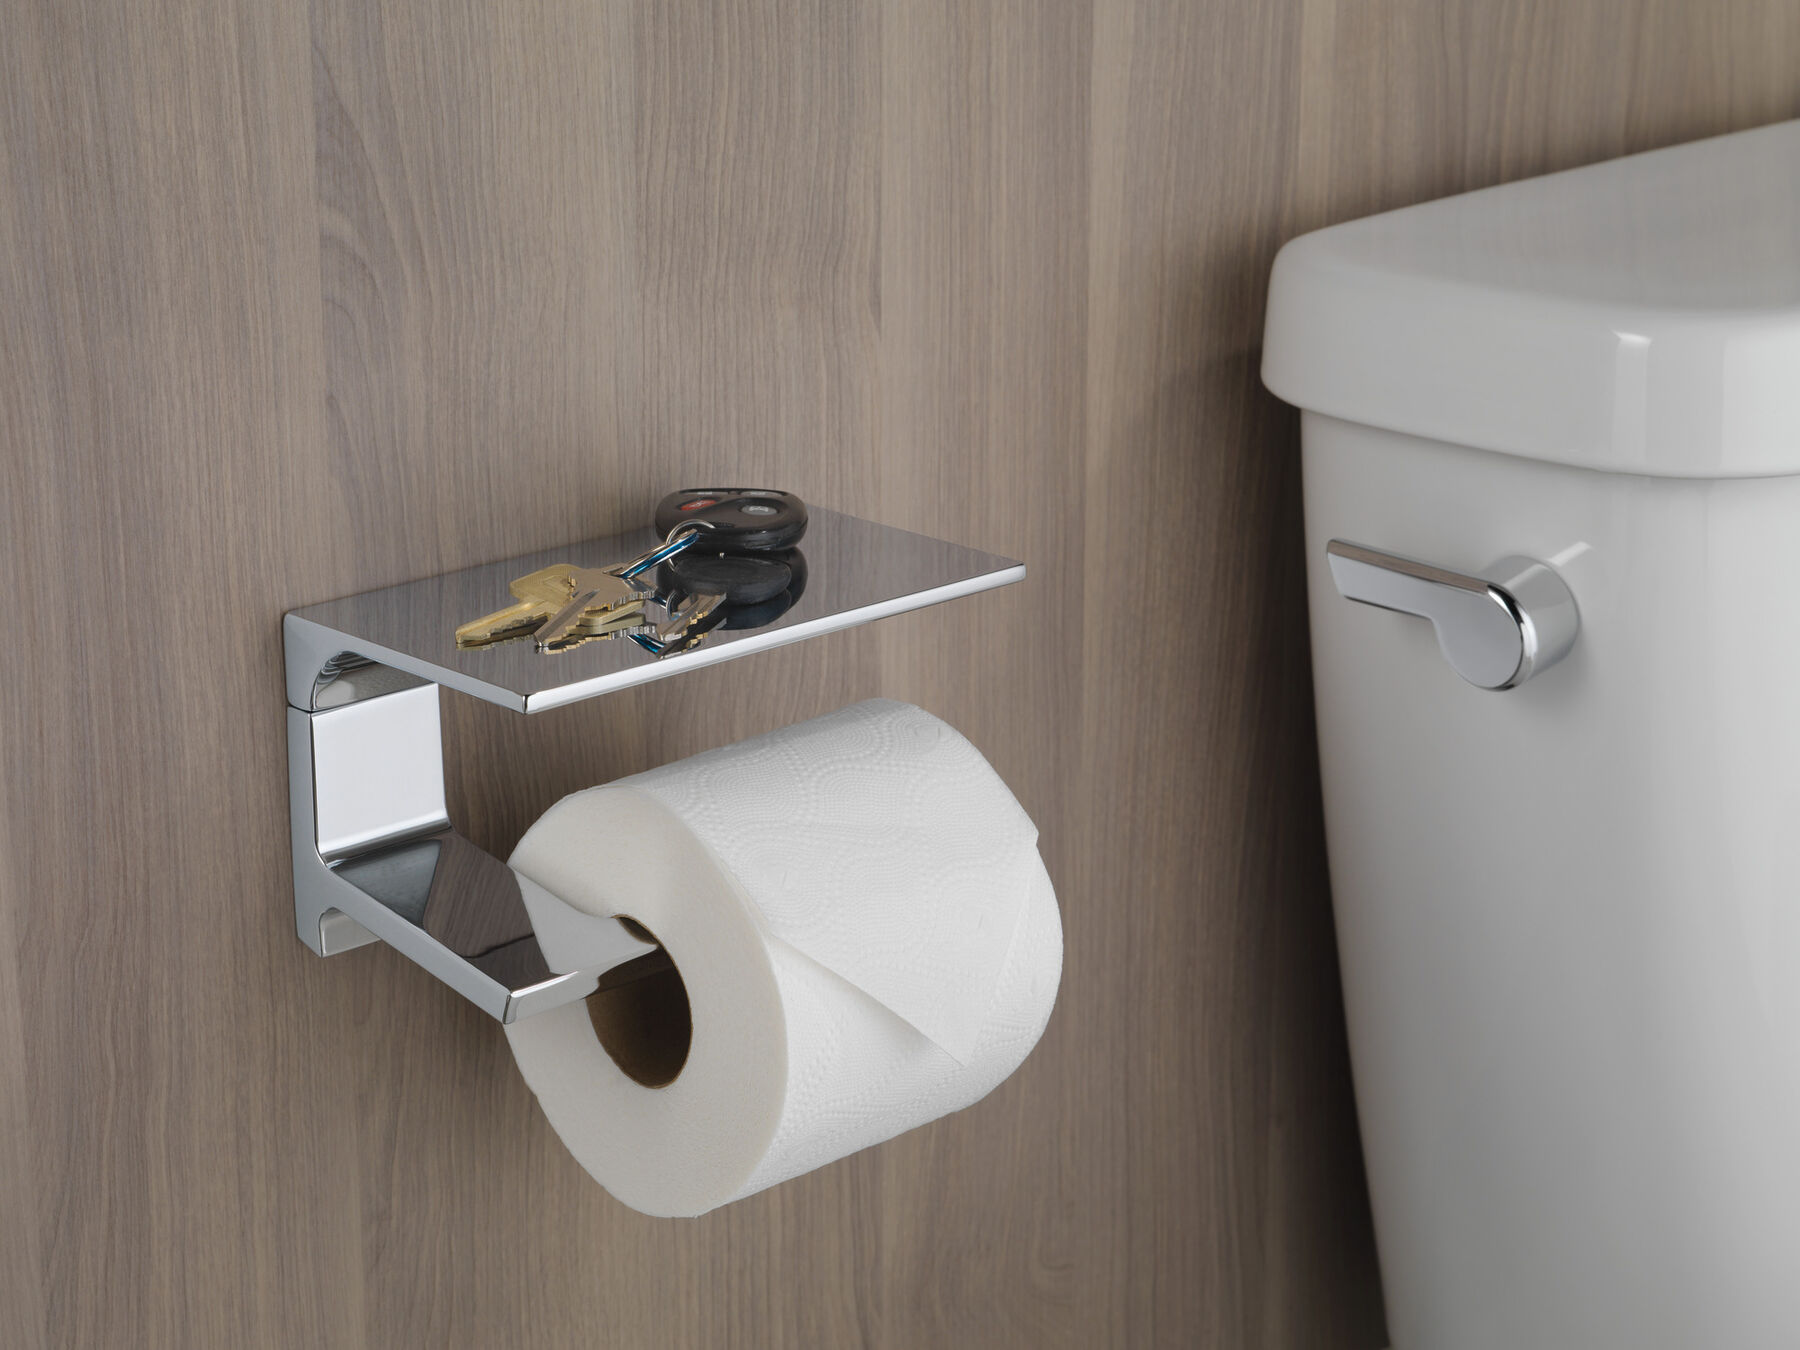 Is There An Ideal Place To Mount Your Toilet Paper Holder In A